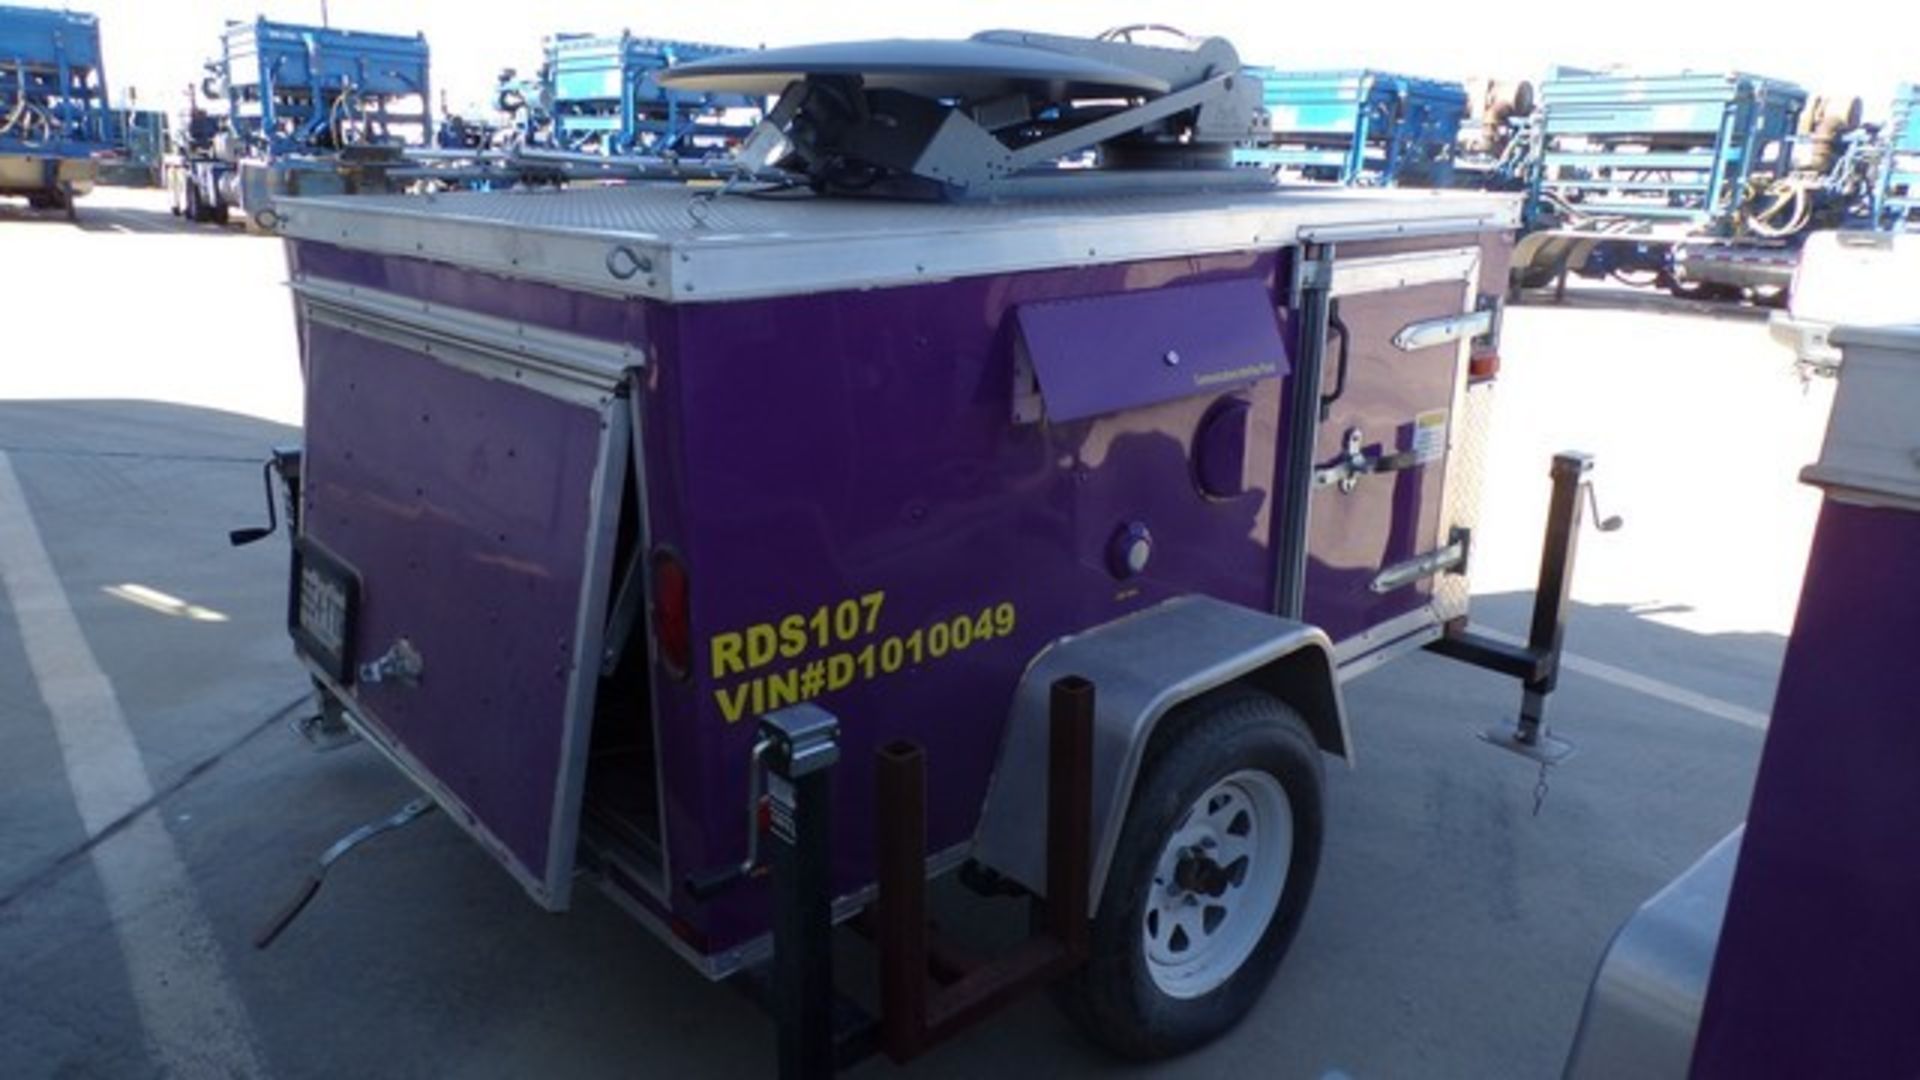 Located in YARD 2 - Odessa, TX (FDT001) (X) 2012 DIAMOND CARGO S/A REMOTE SATELLITE/ DATA SYSTEM - Image 3 of 4